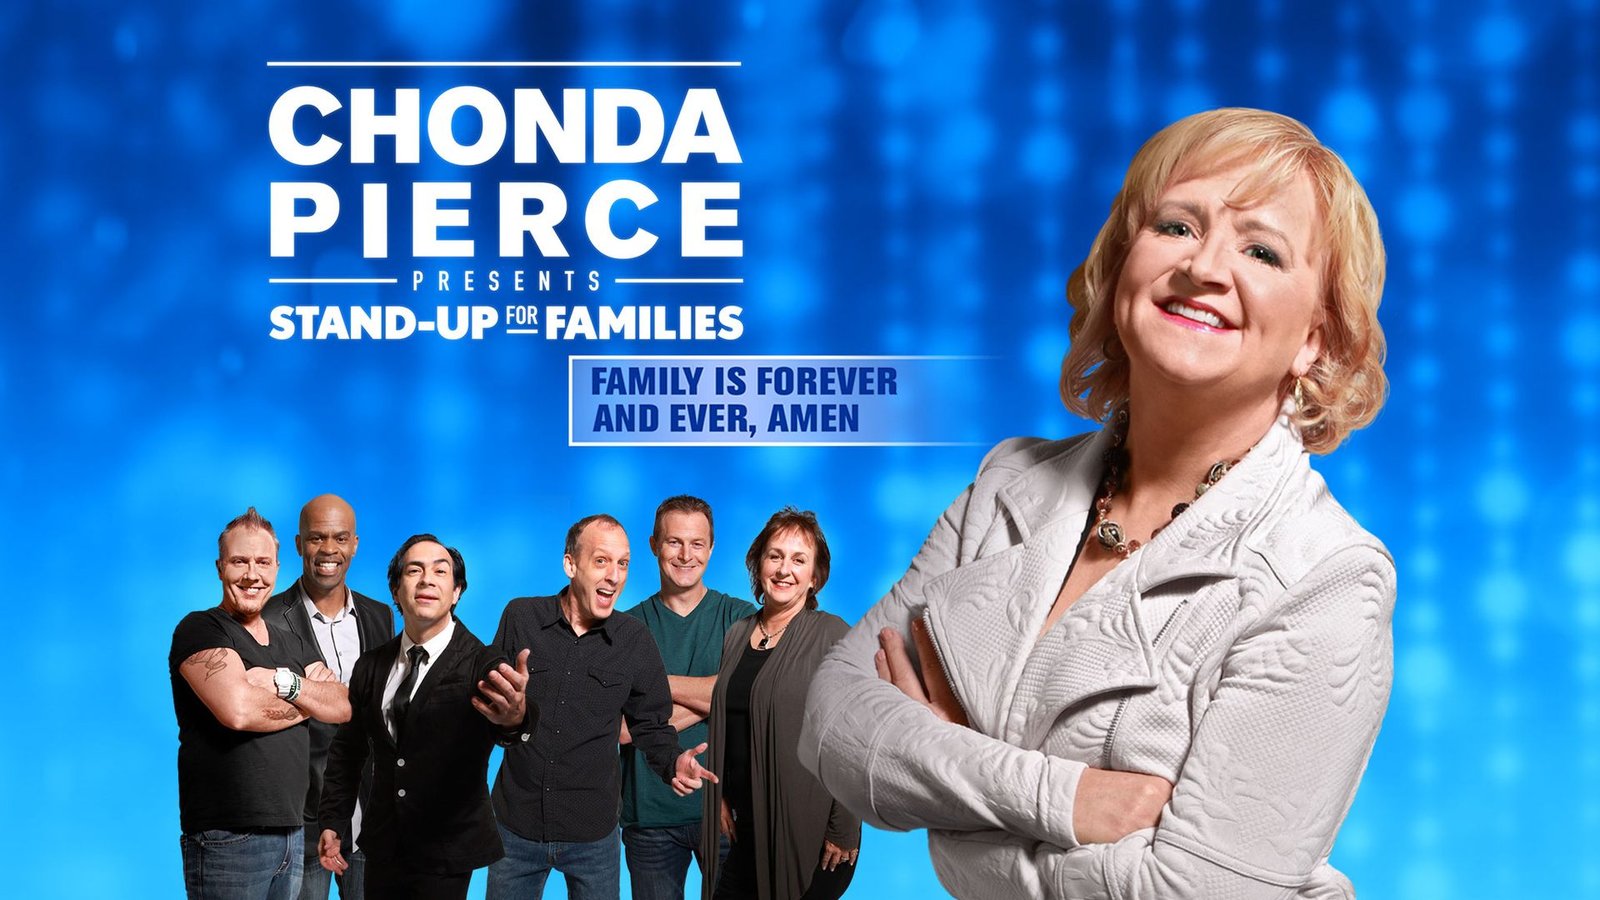 Chonda Pierce Presents: Stand Up for Families - Family Is Forever and Ever, Amen